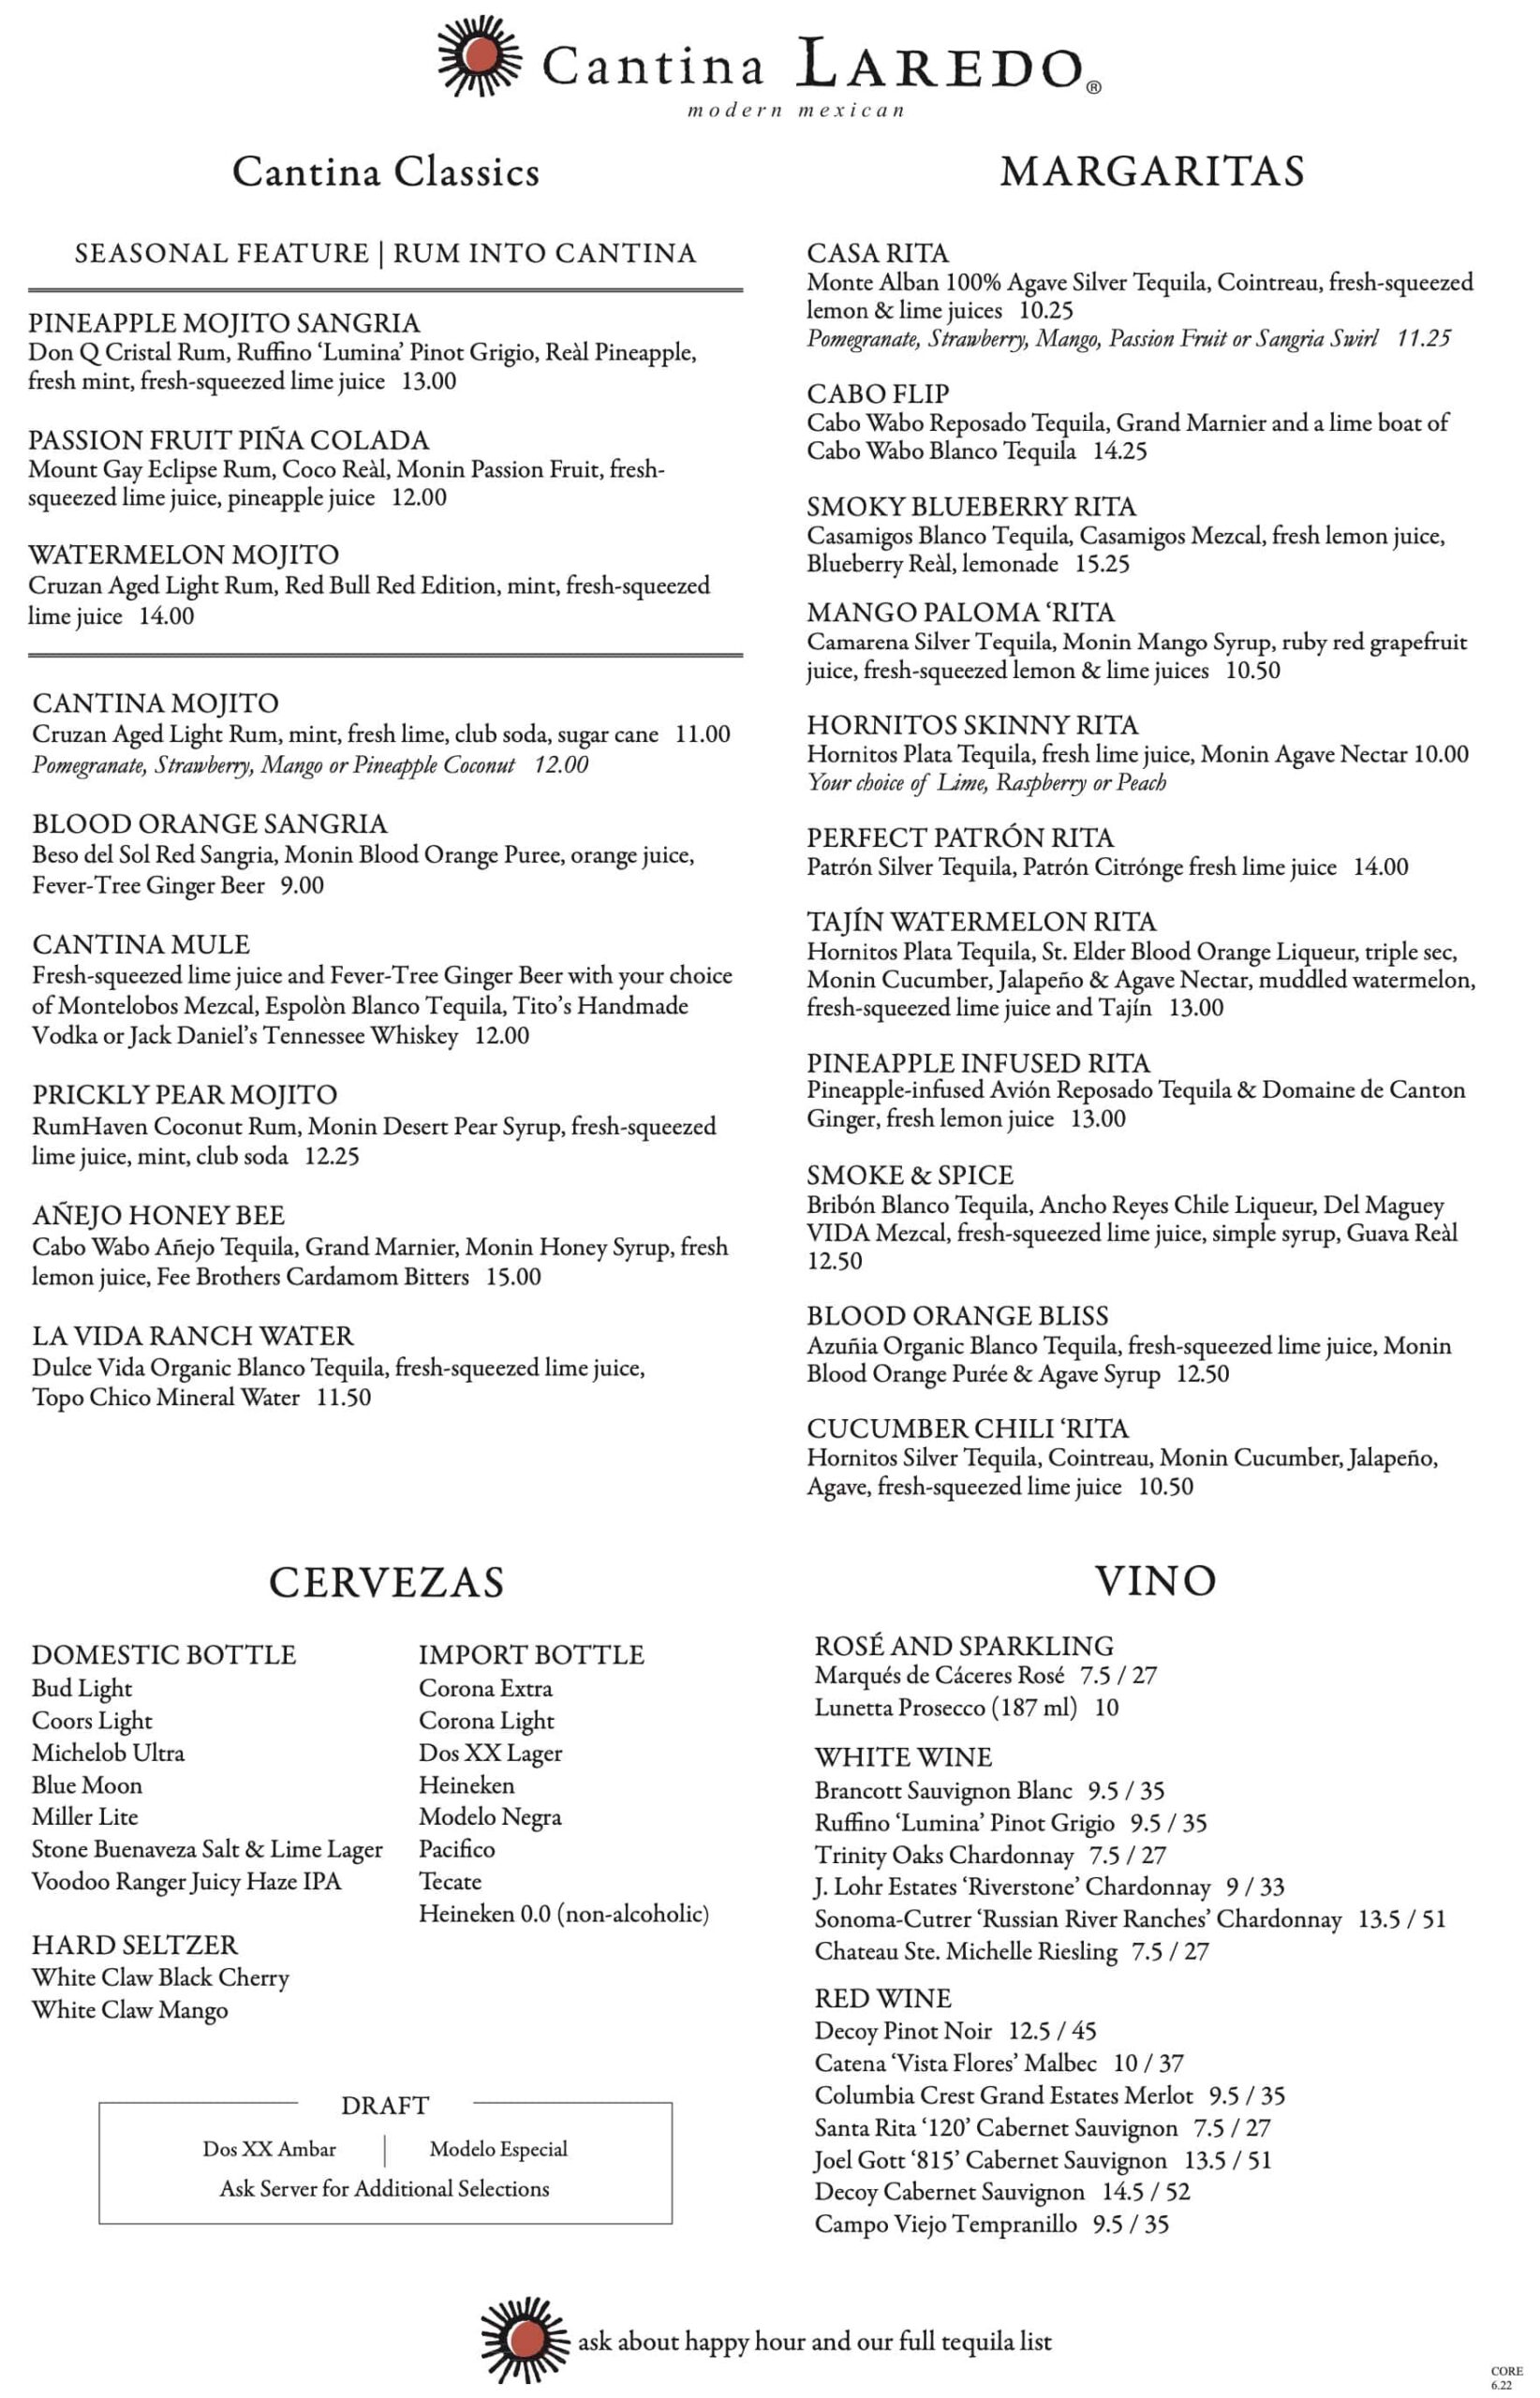 Cantina Laredo Jacksonville Lunch and Dinner Menu